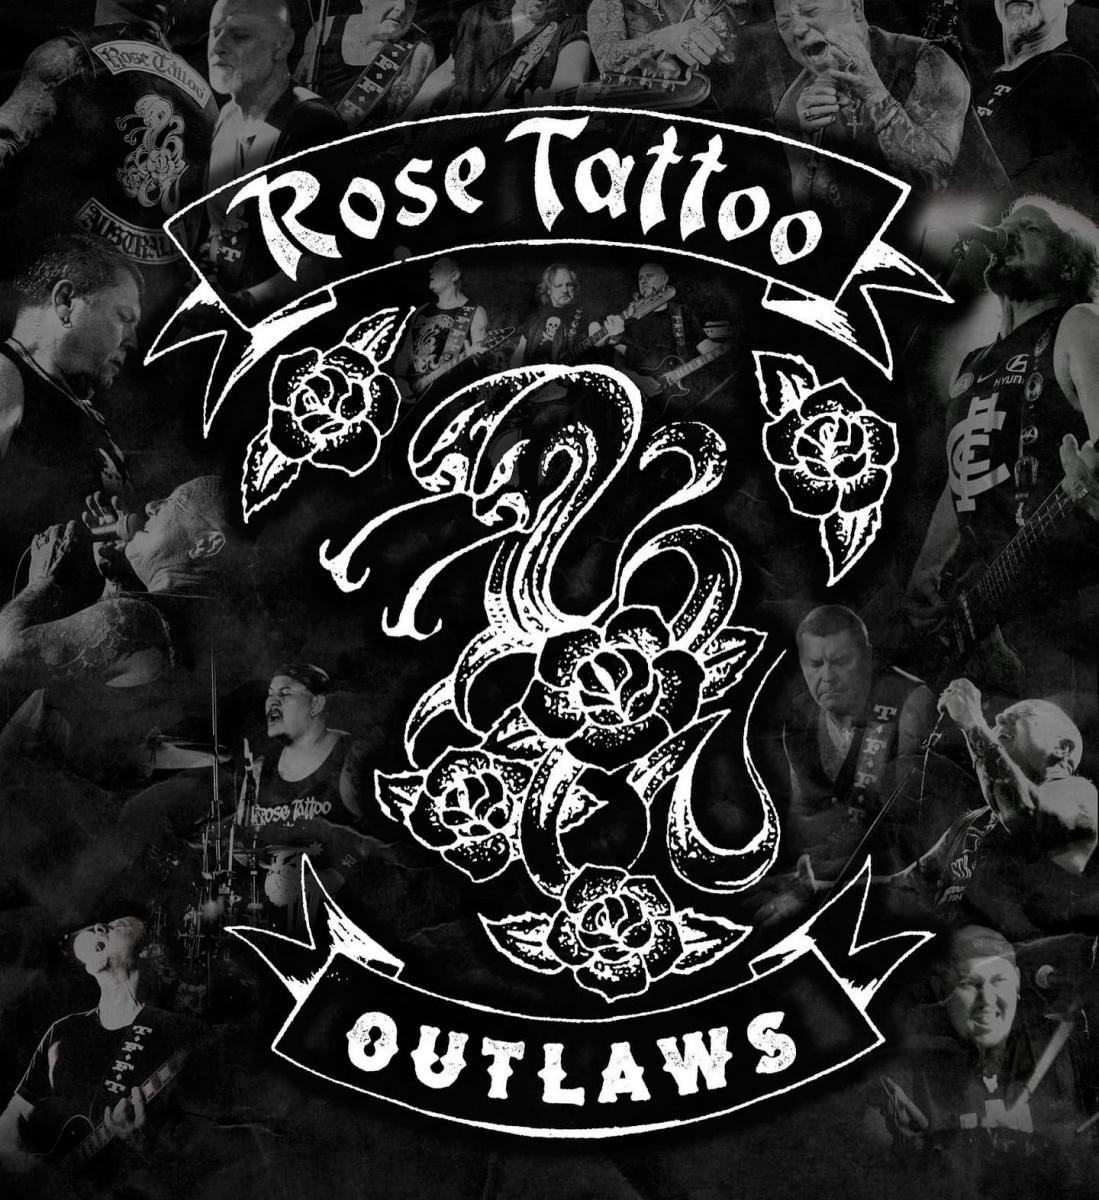 ROSE TATTOO - Outlaws